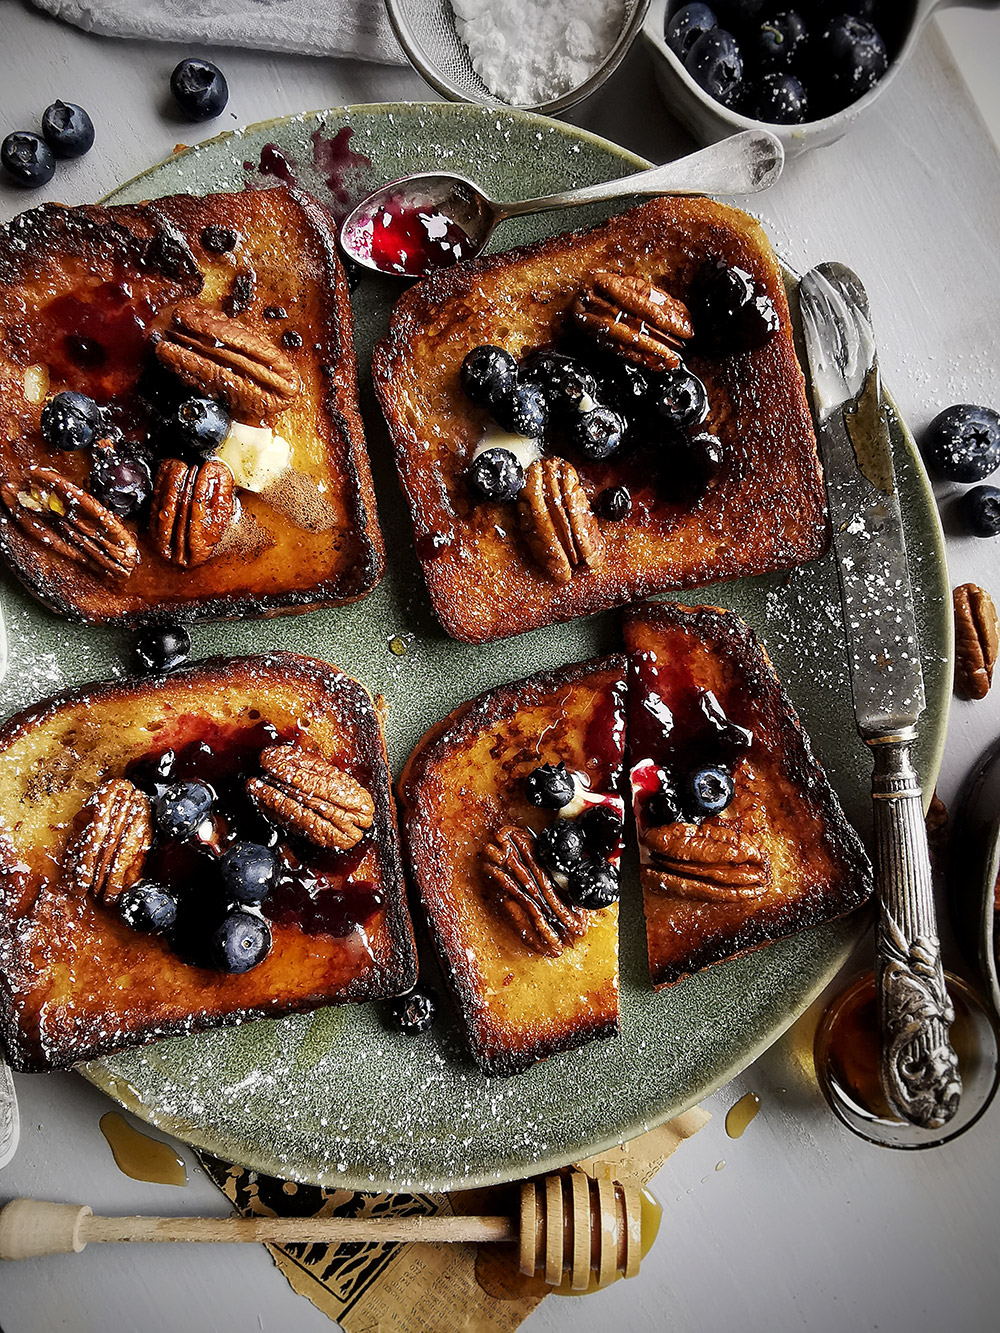 Blueberry pecan french toasts